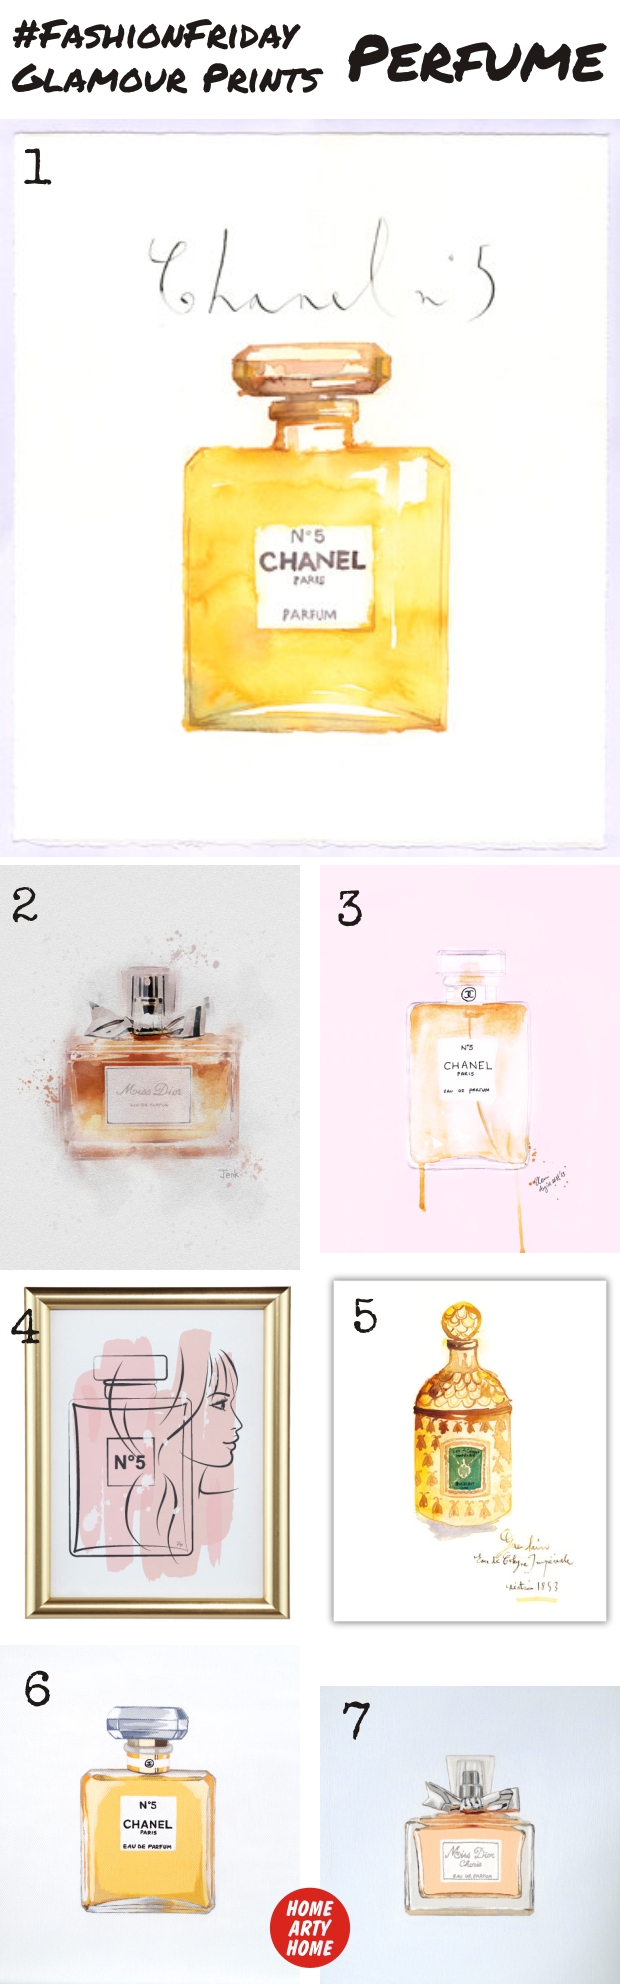 FashionFriday Perfume homeartyhome